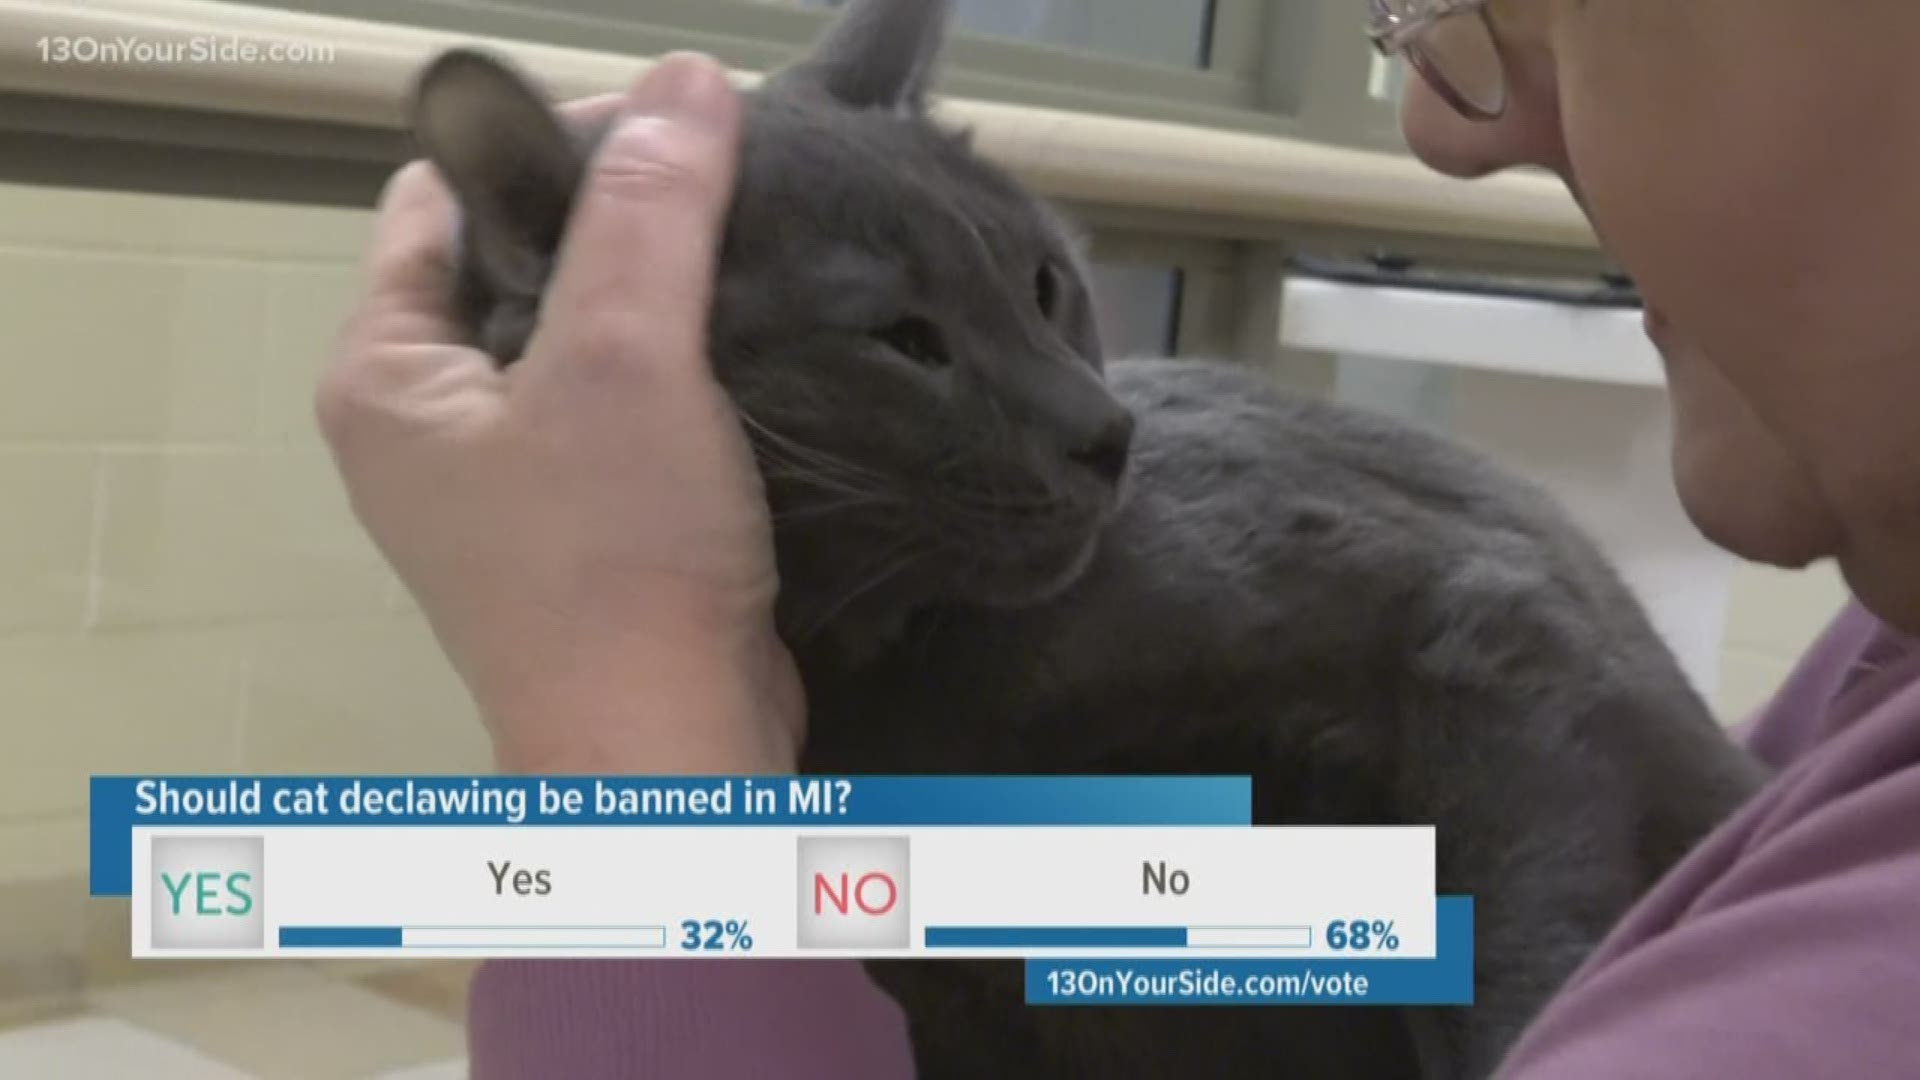 If passed, declawing cats could result in $1,000 fine.